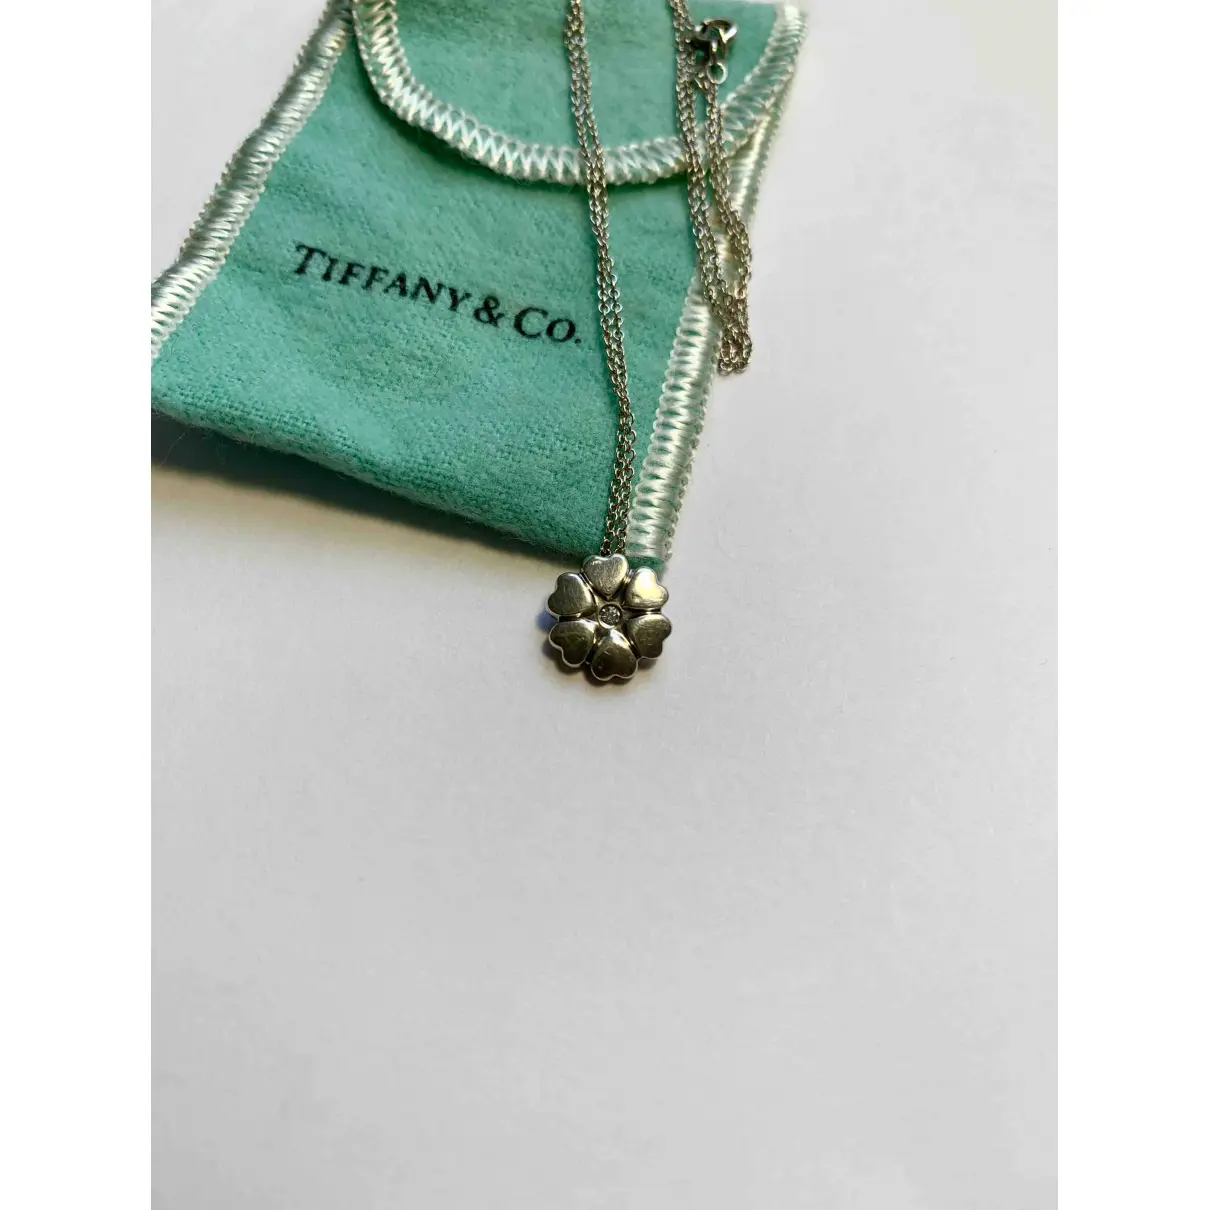 Buy Tiffany & Co Paloma Picasso silver necklace online